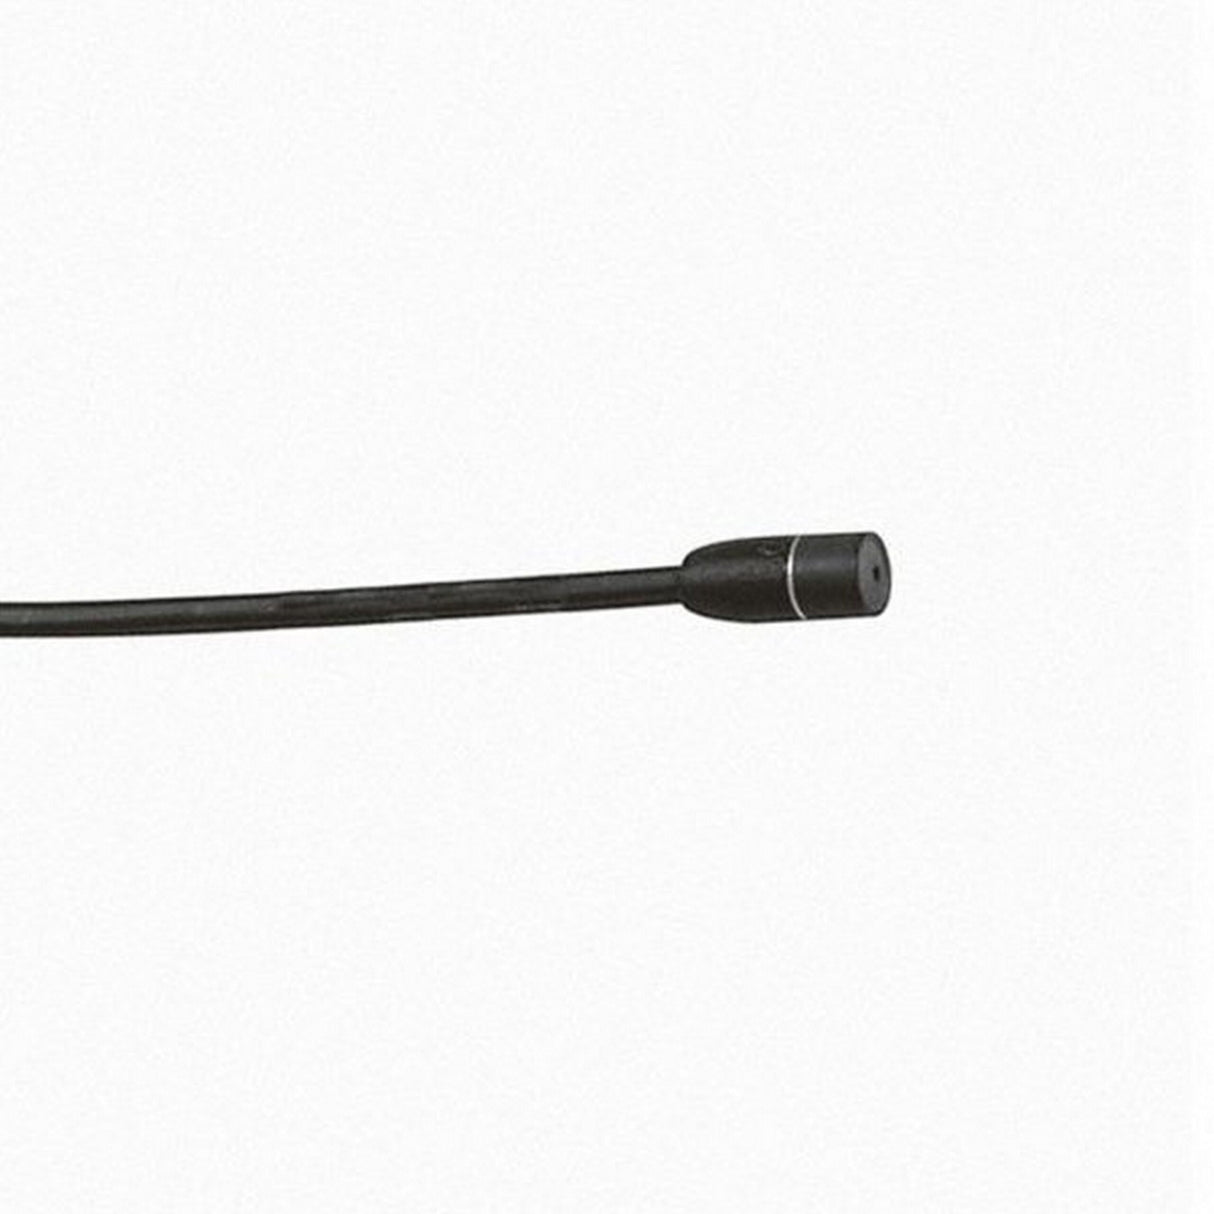 Sennheiser MKE 2 Omni-Directional Lavalier Microphone with Evolution Wireless Connector, Black